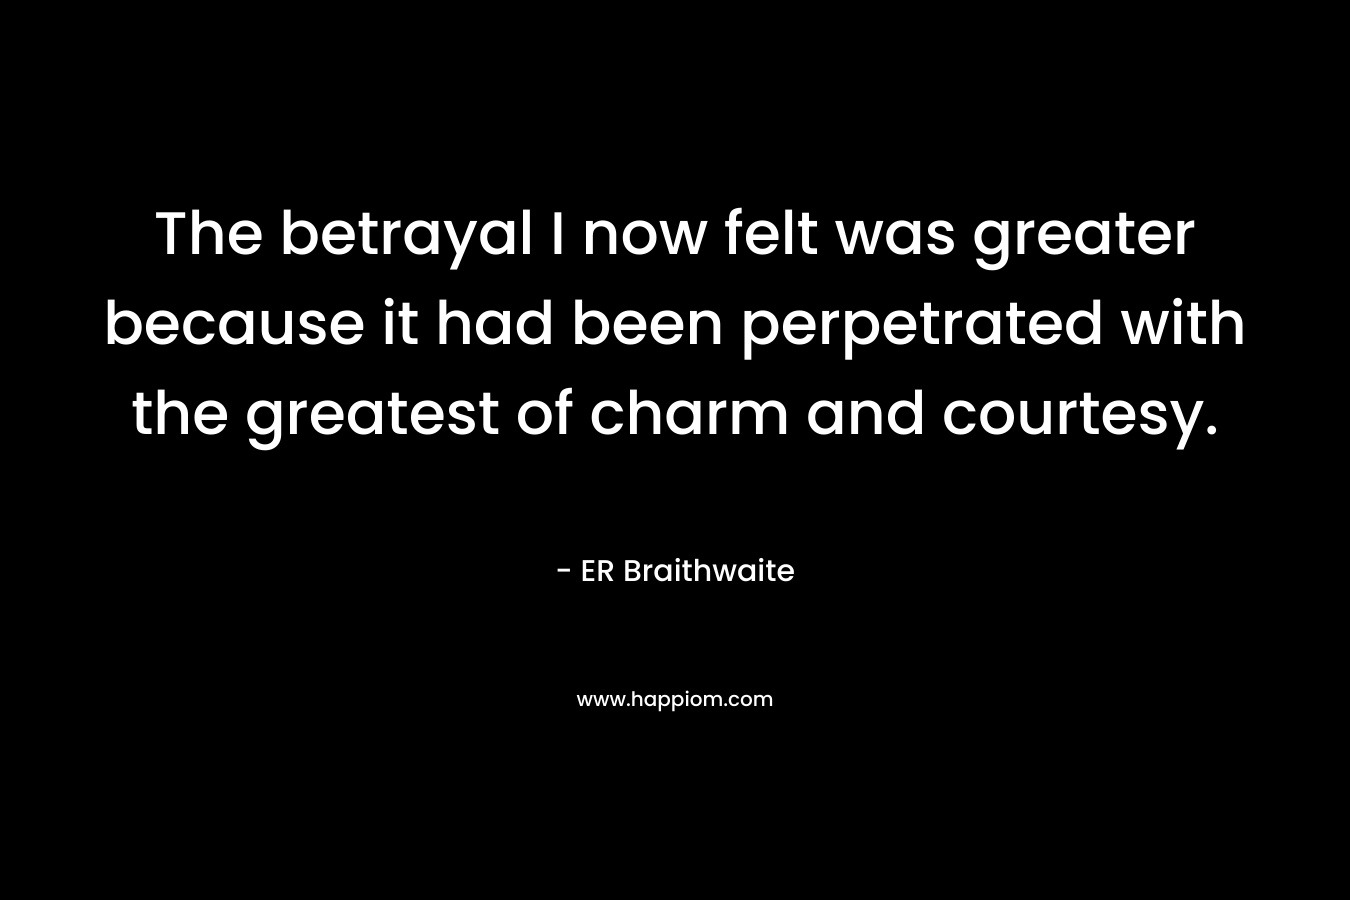 The betrayal I now felt was greater because it had been perpetrated with the greatest of charm and courtesy. – ER Braithwaite